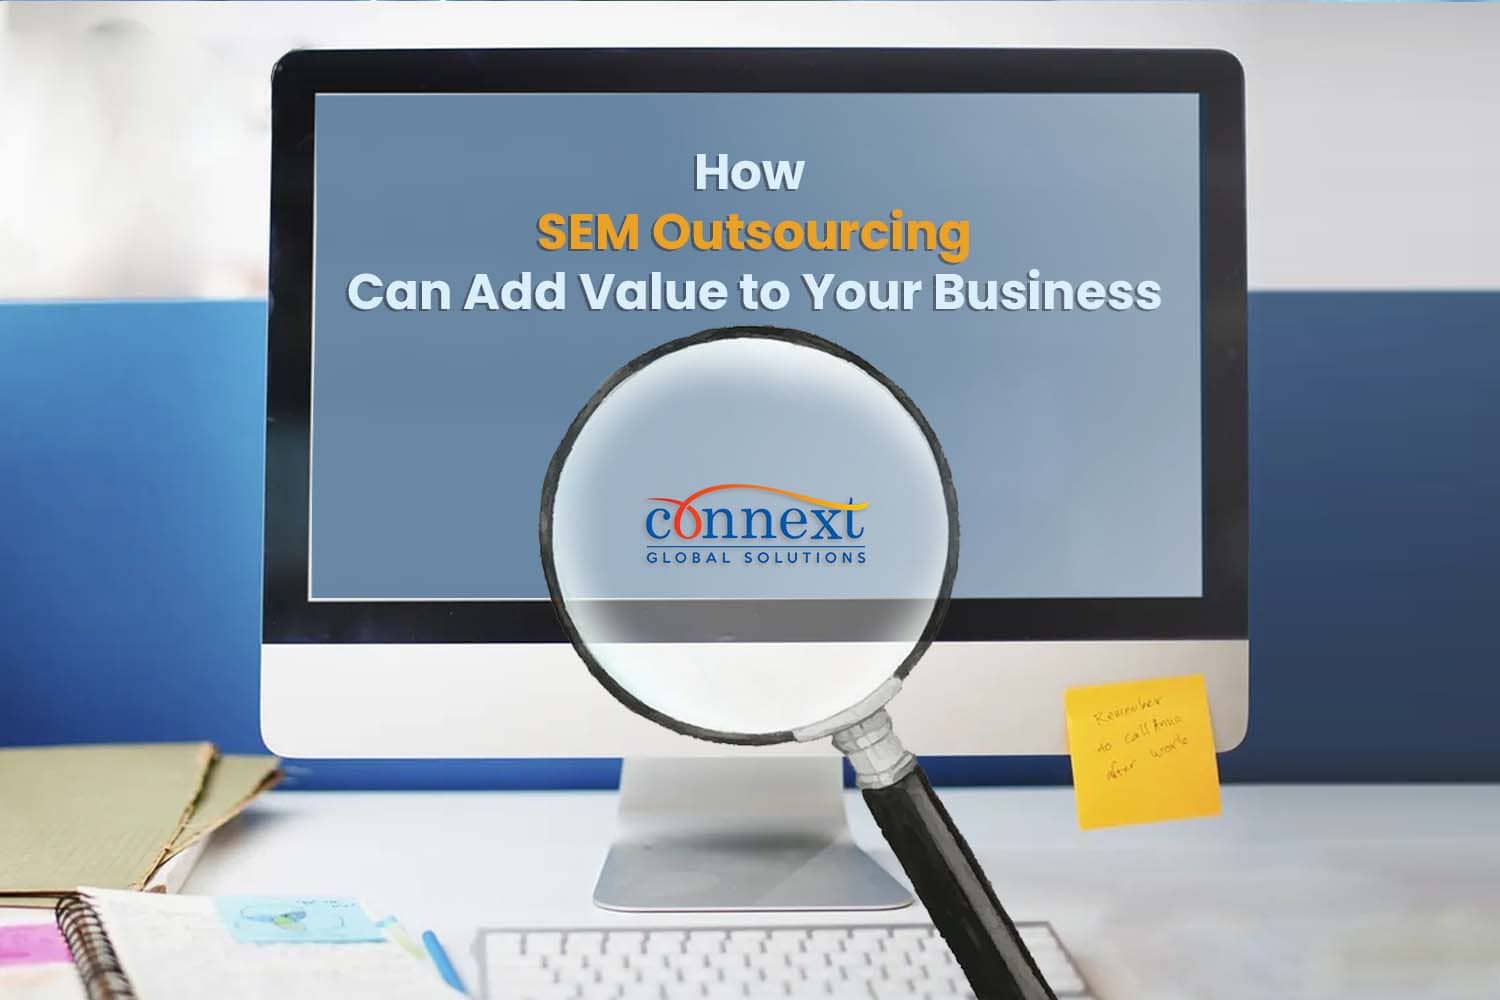 How SEM Outsourcing Can Add Value to Your Business